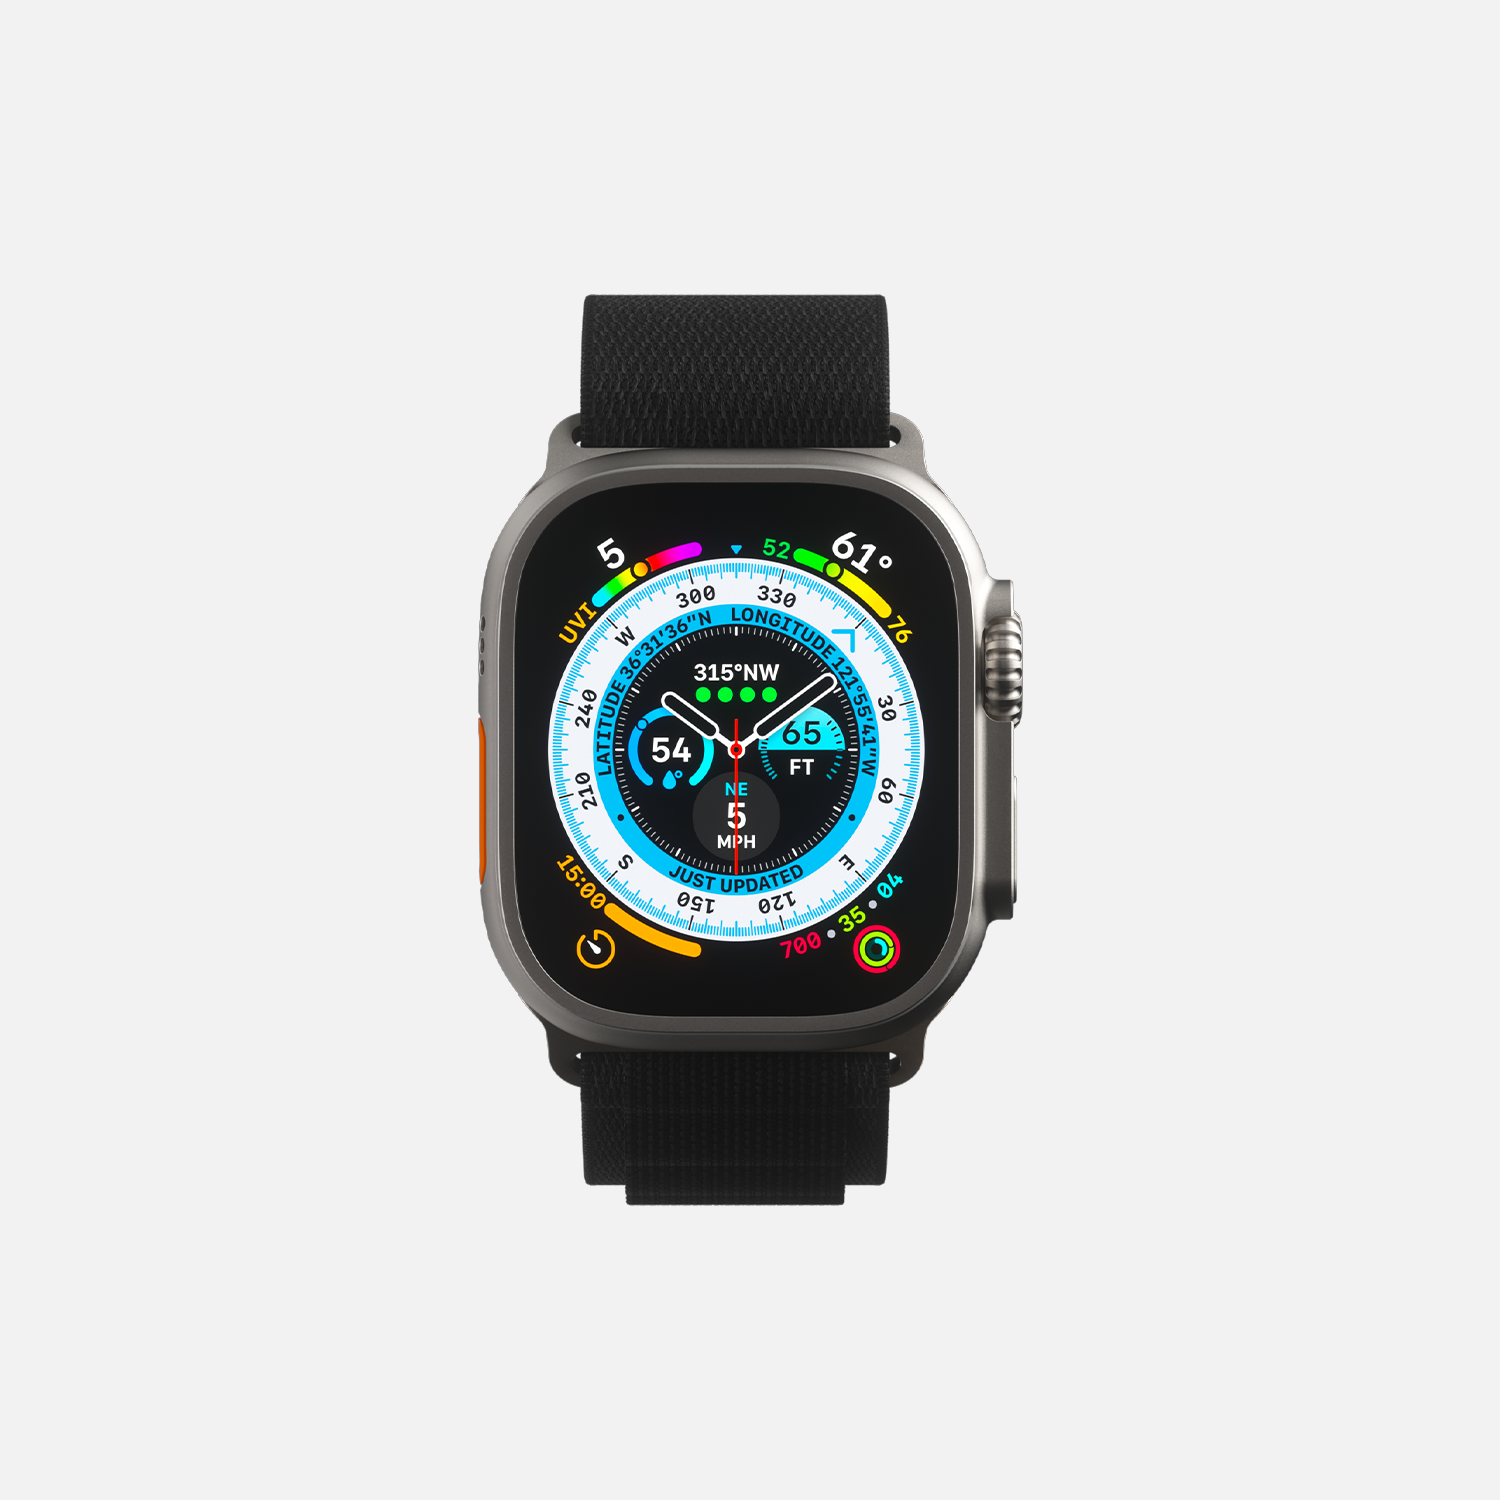 Smartwatch with colorful display showing compass and altitude, isolated on white background.